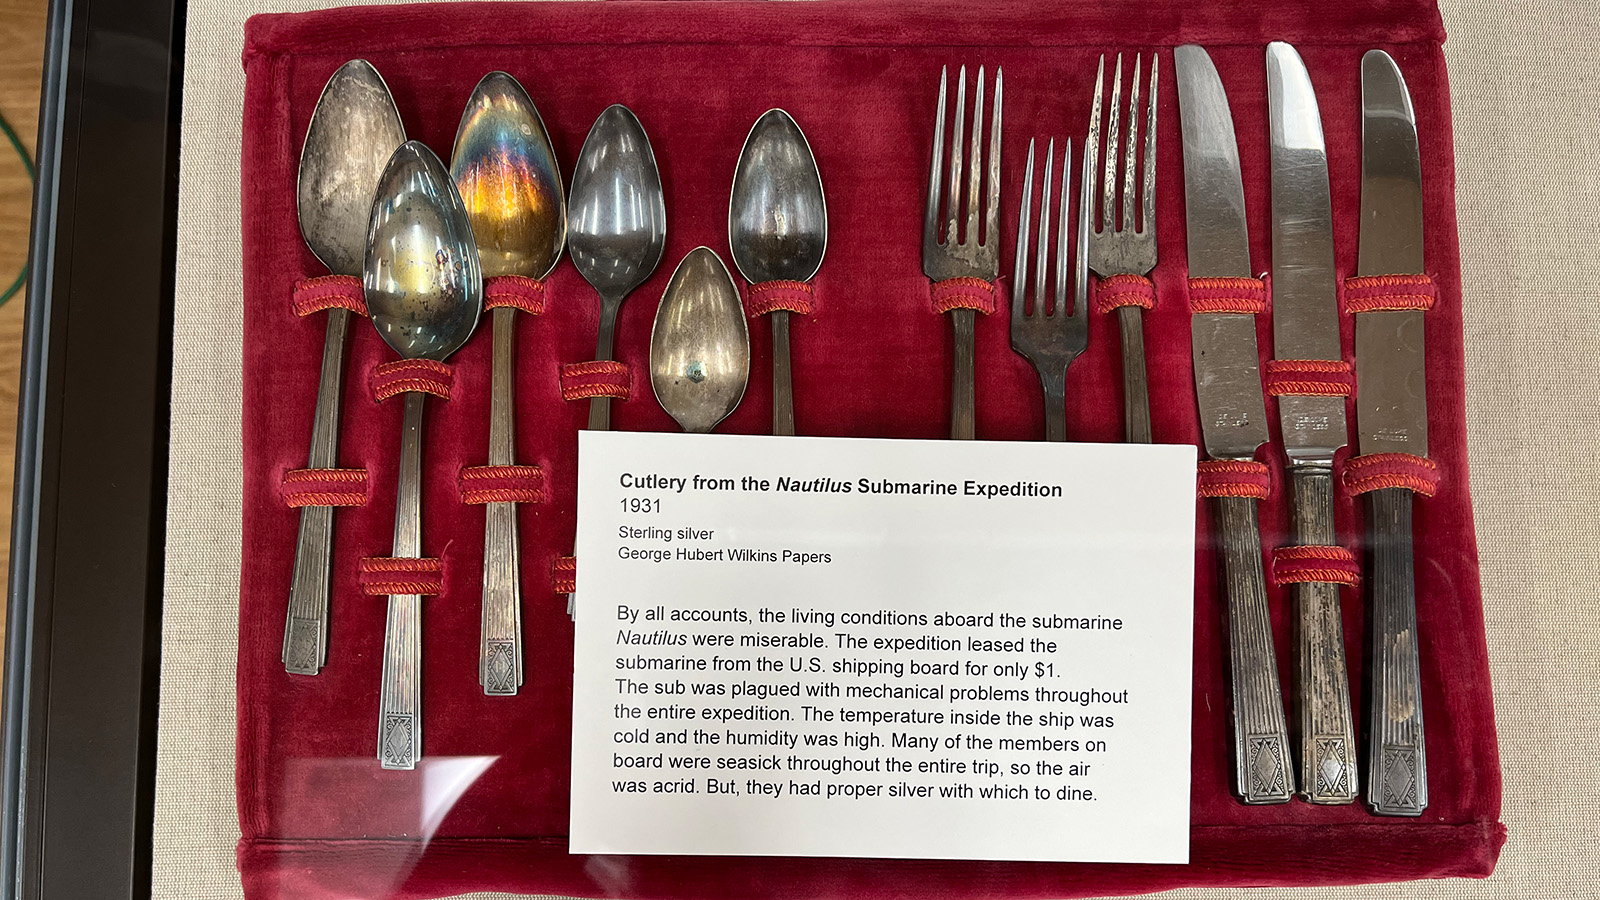 Silver cutlery from the Nautilus